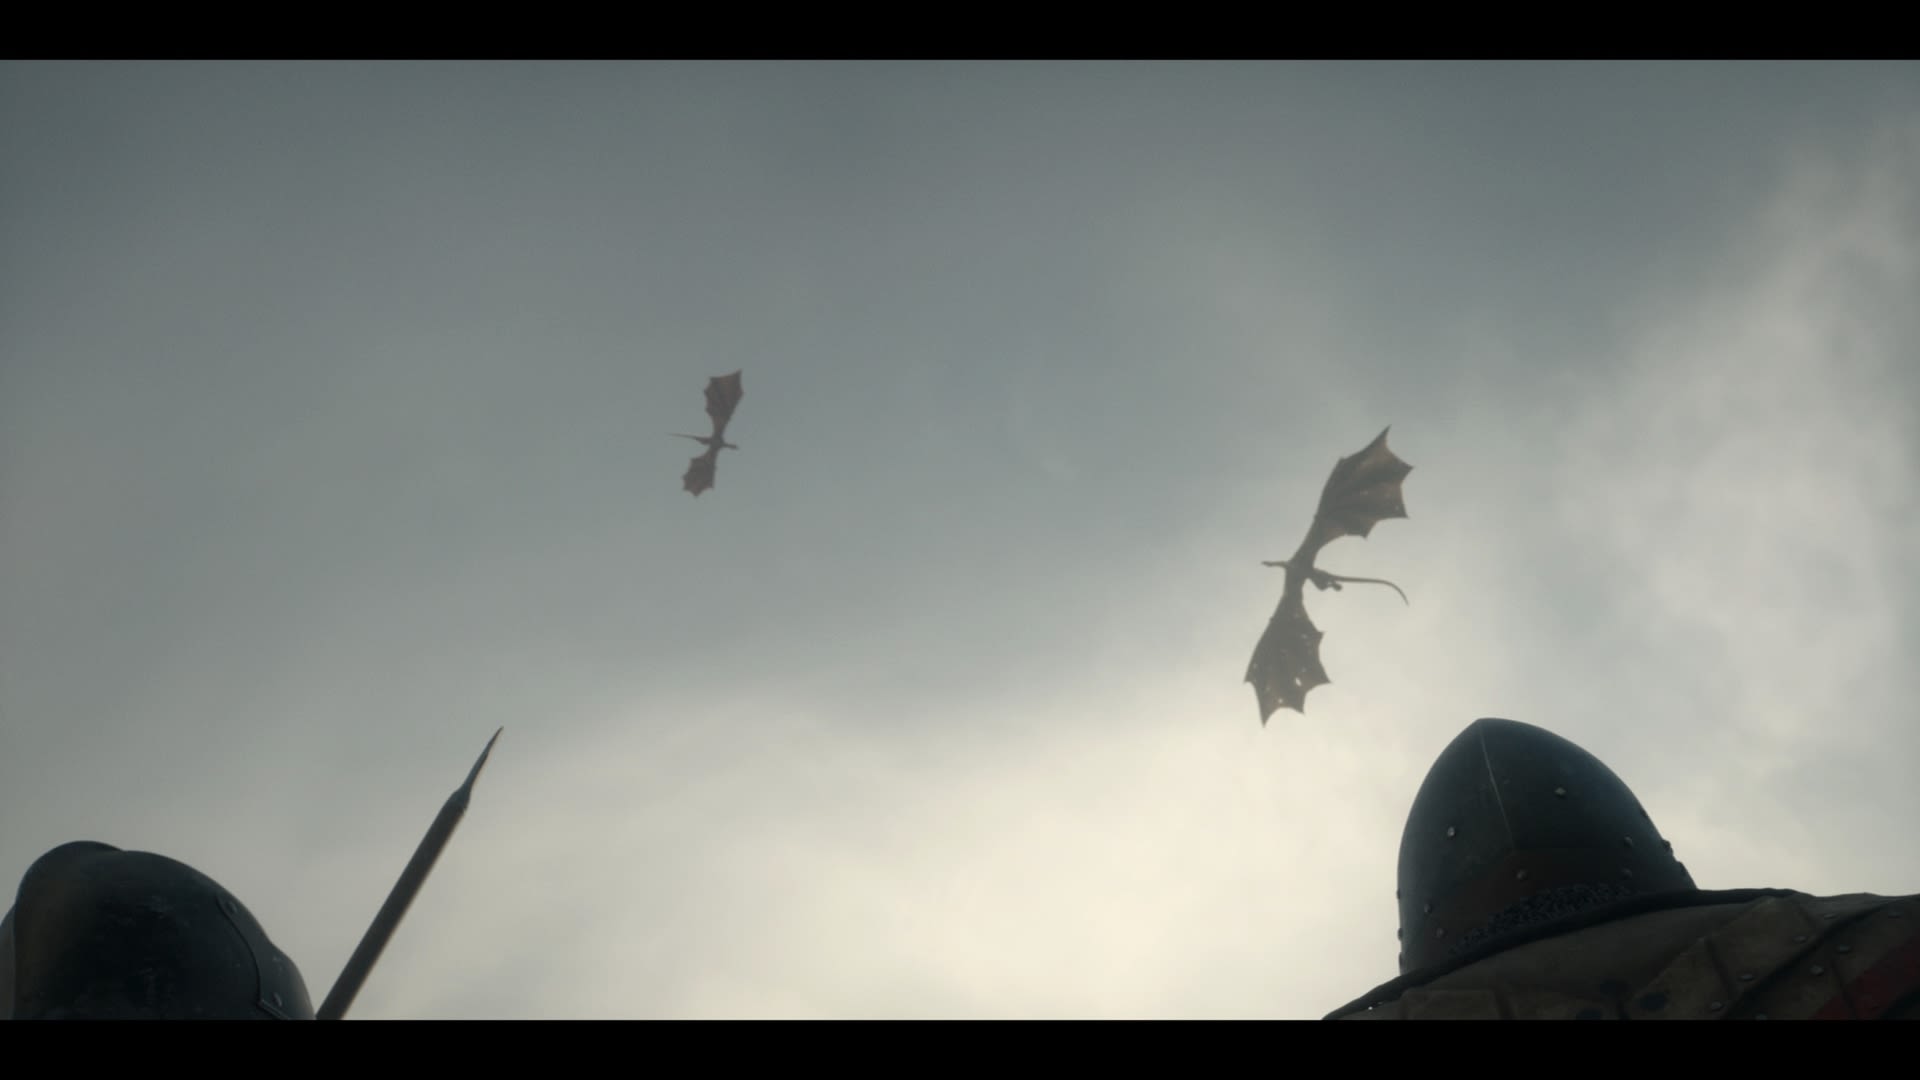 How Much Targaryen Blood Do You Need to Ride a Dragon?